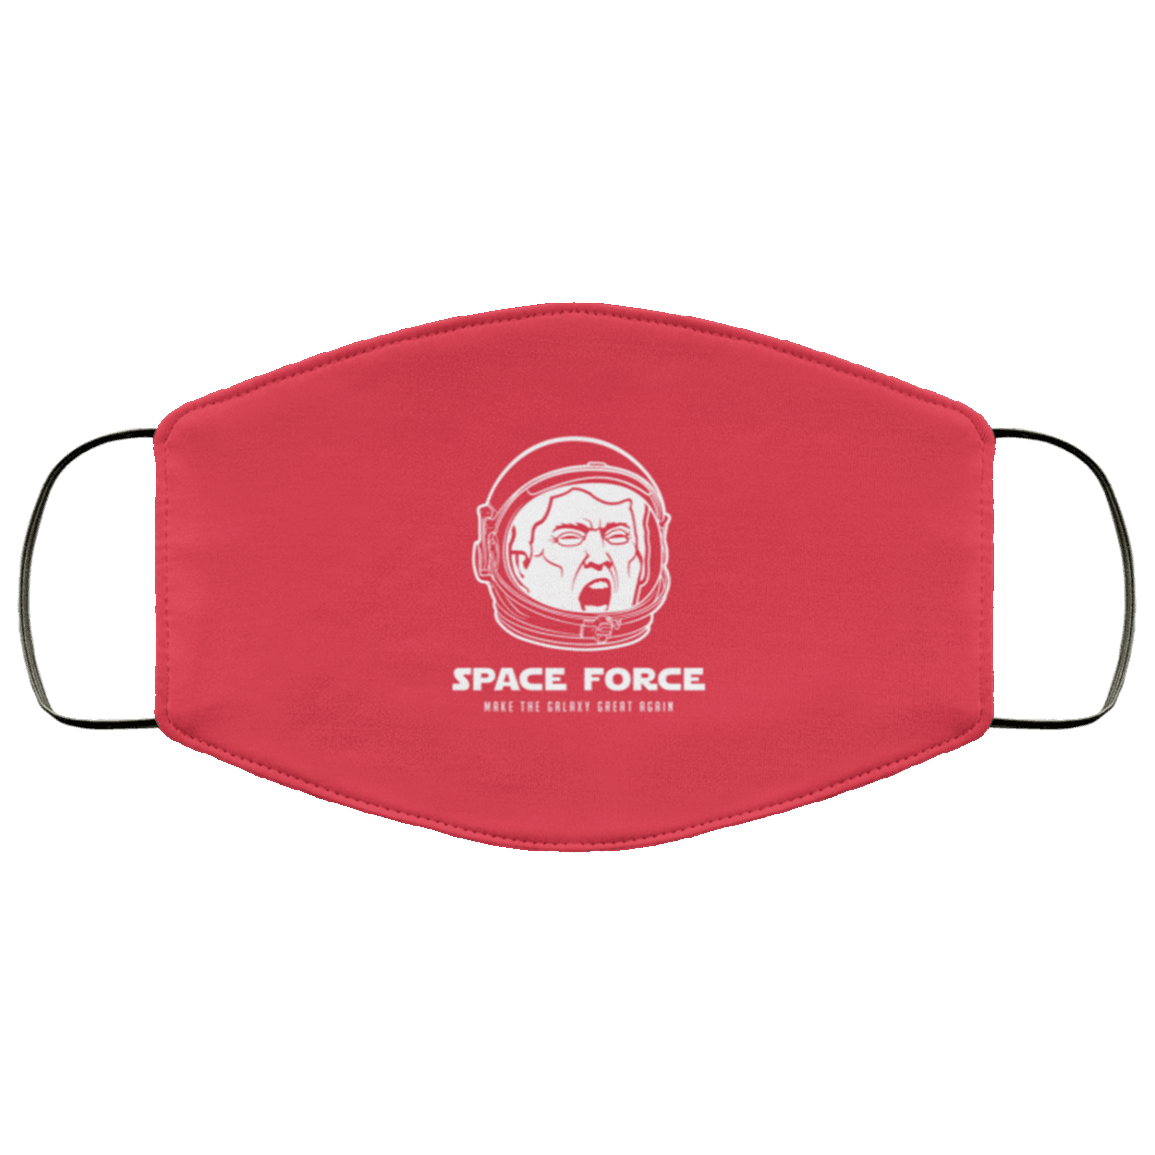 Designs by MyUtopia Shout Out:Space Force Astronaut Trump Humor Adult Fabric Face Mask with Elastic Ear Loops,3 Layer Fabric Face Mask / Red / Adult,Fabric Face Mask